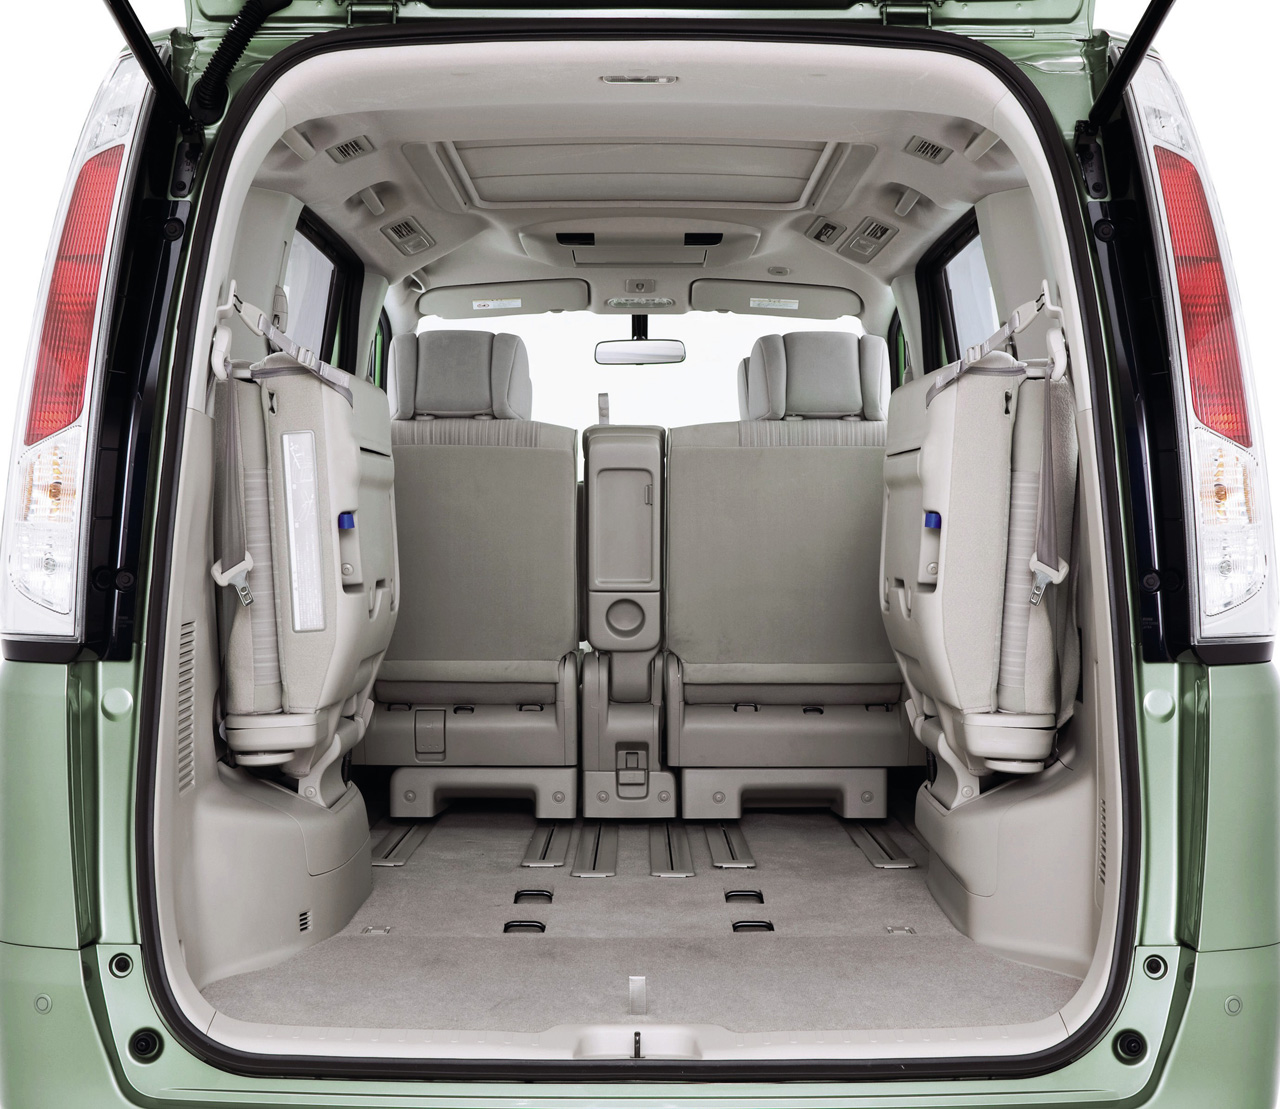 Nissan serena part of the trunk is very spacious.